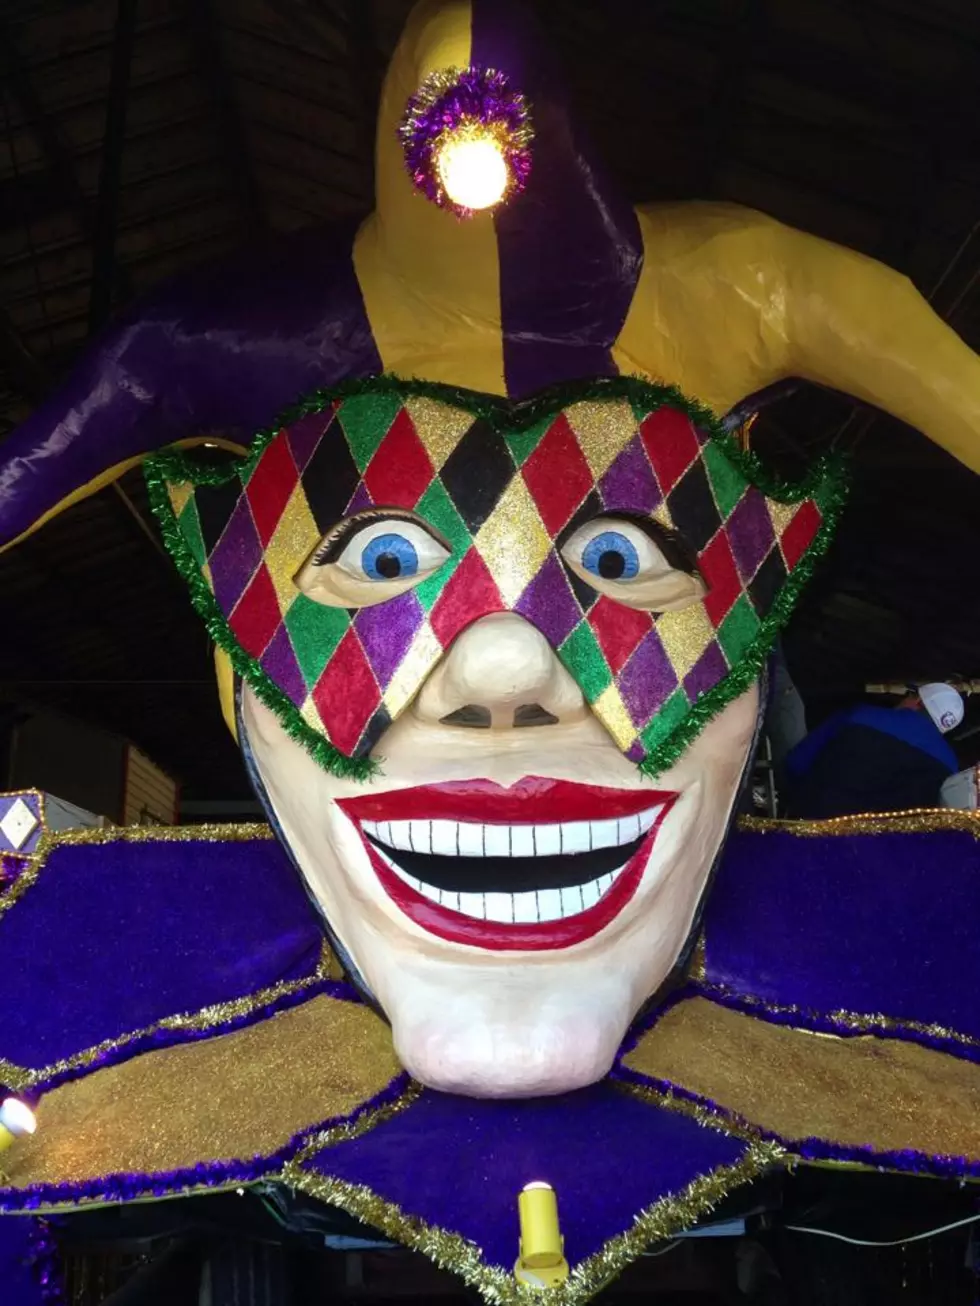 The Krewe Of Centaur Parade Rolls This Saturday, February 22nd! [VIDEO]